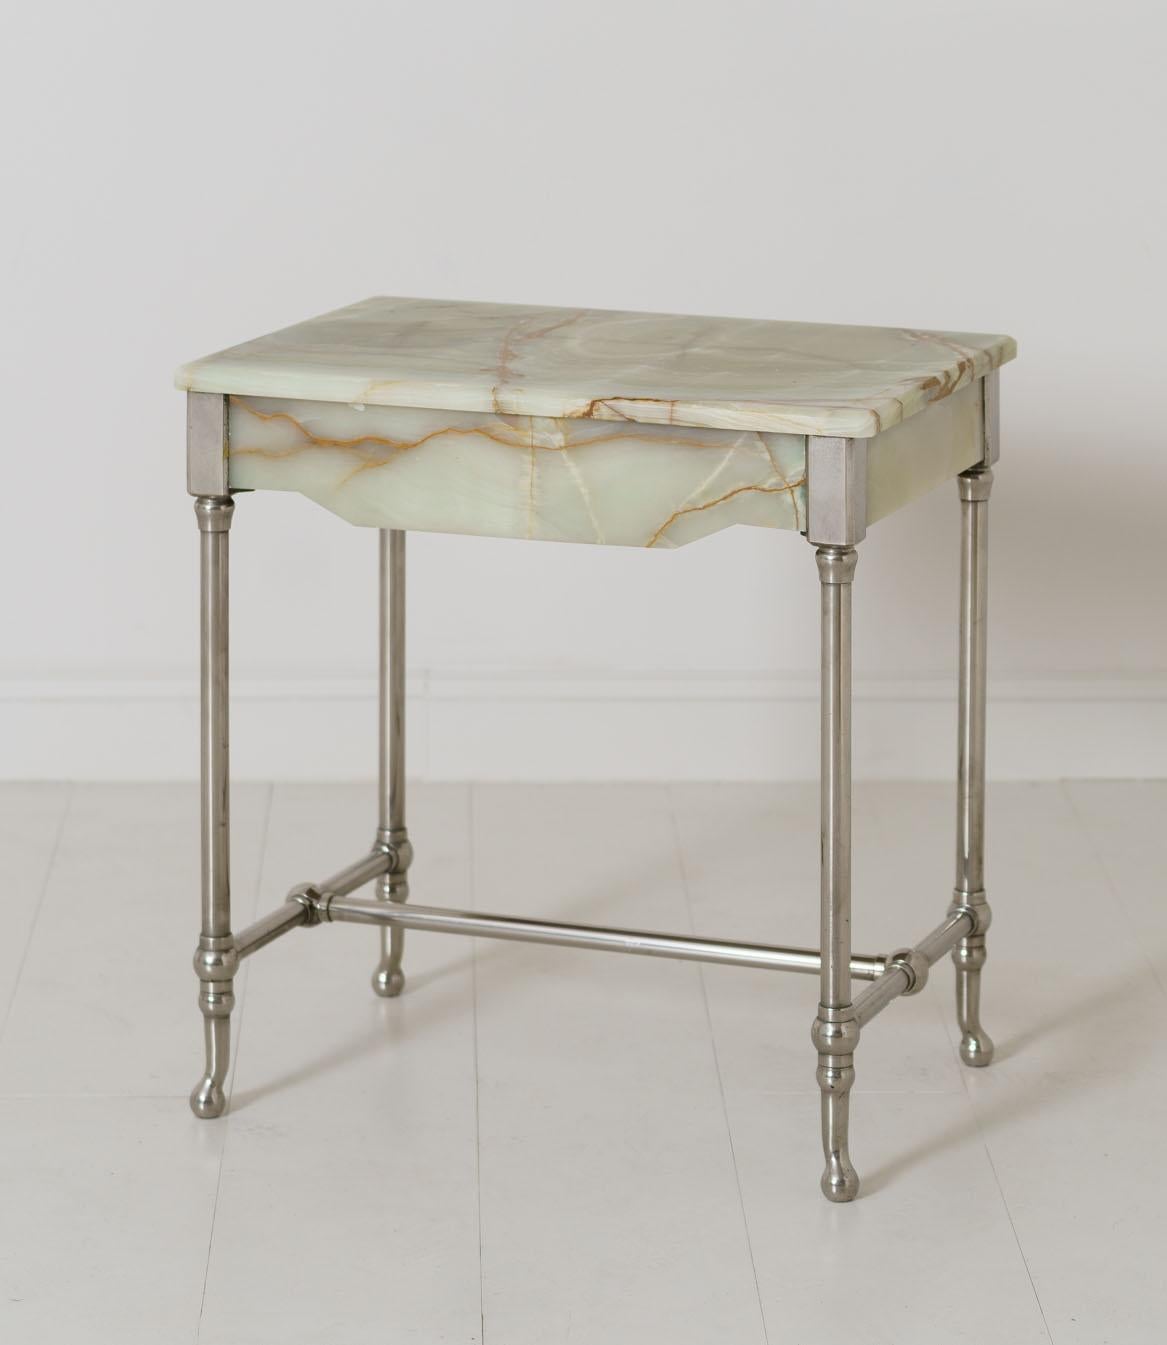 A rare agate patisserie table on a nickel-plated base, dated to the early 20th century. This beautiful piece came from a patisserie shop in Avignon, the Provence region of France, circa 1920.
 